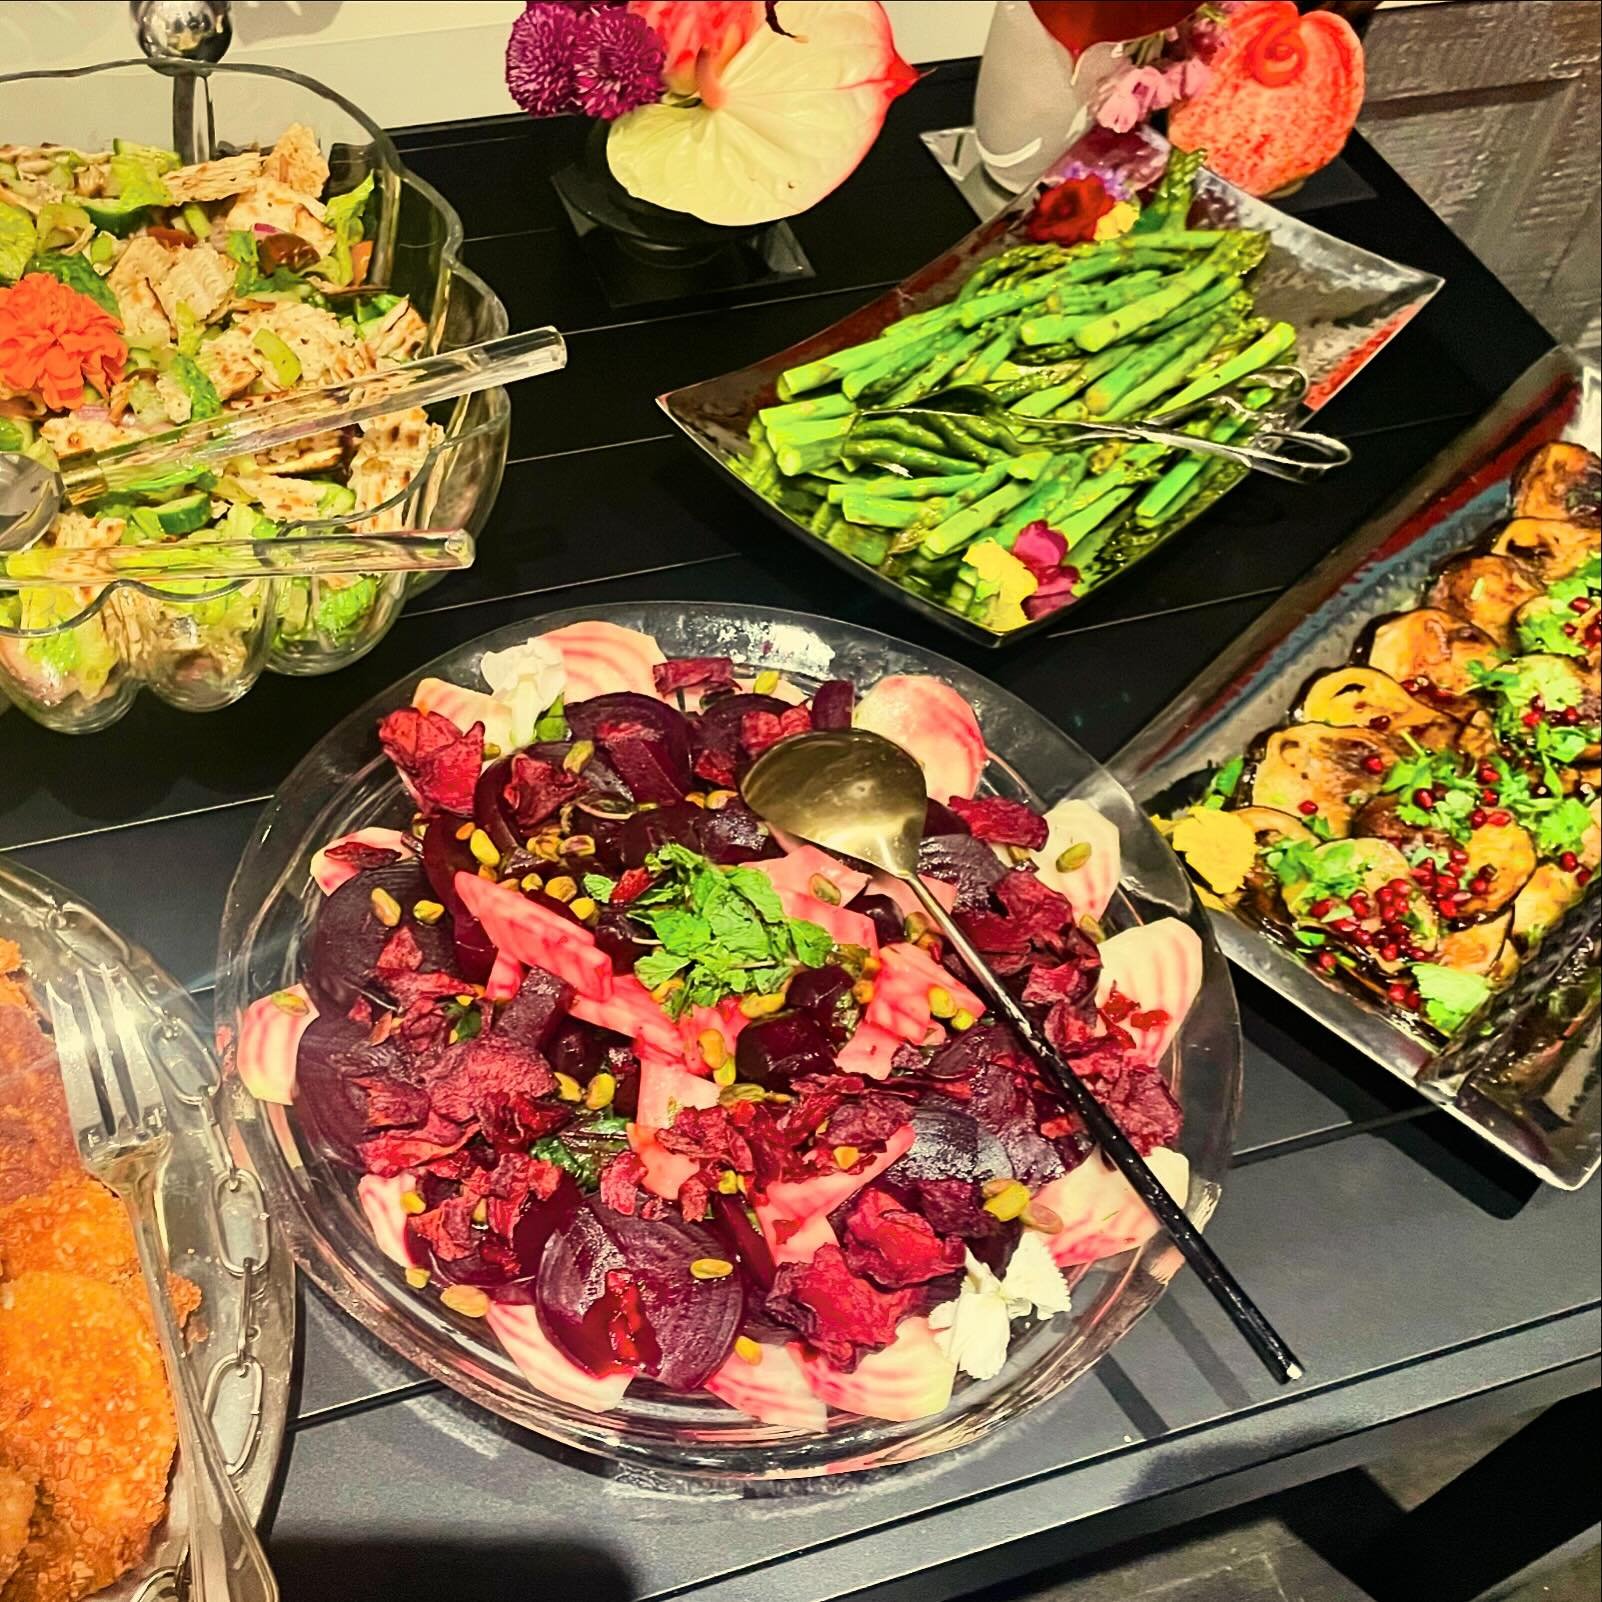 Passover buffet&hellip;#bluaubergine #fabulousfood #catering #privatechef #nycprivatechef